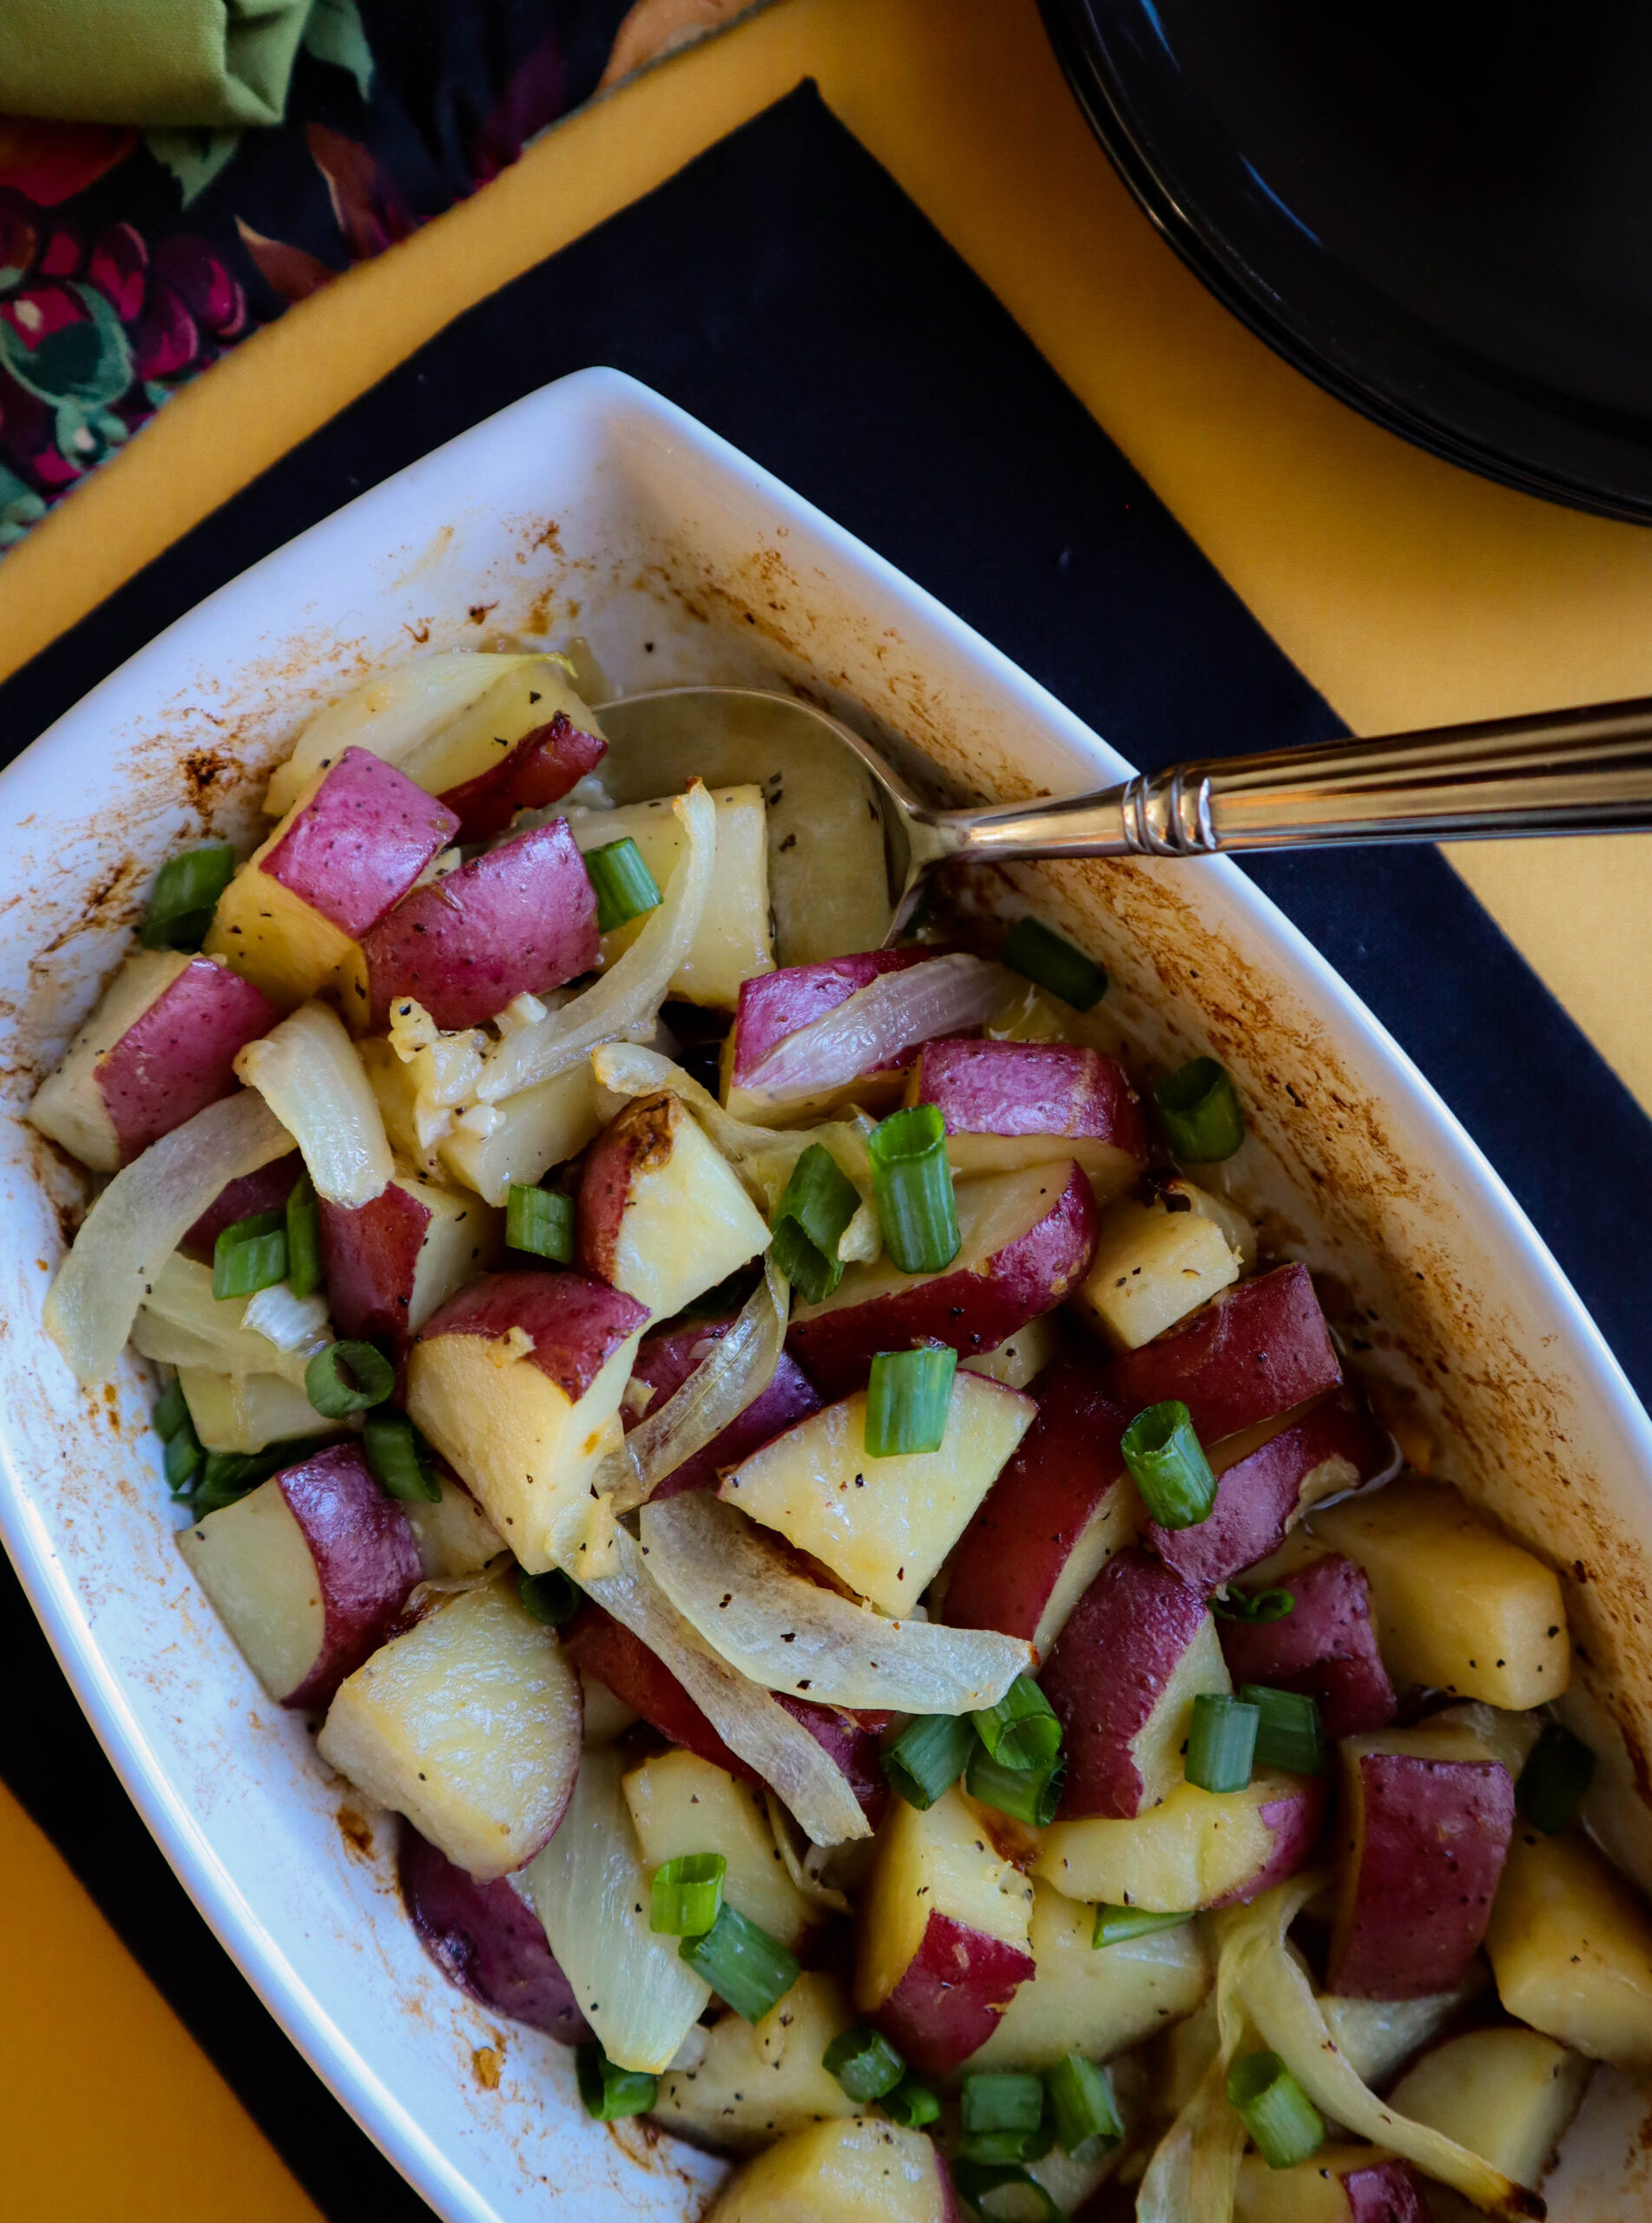 POTATO AND ONION IN A GARLIC BUTTER SAUCE - pic